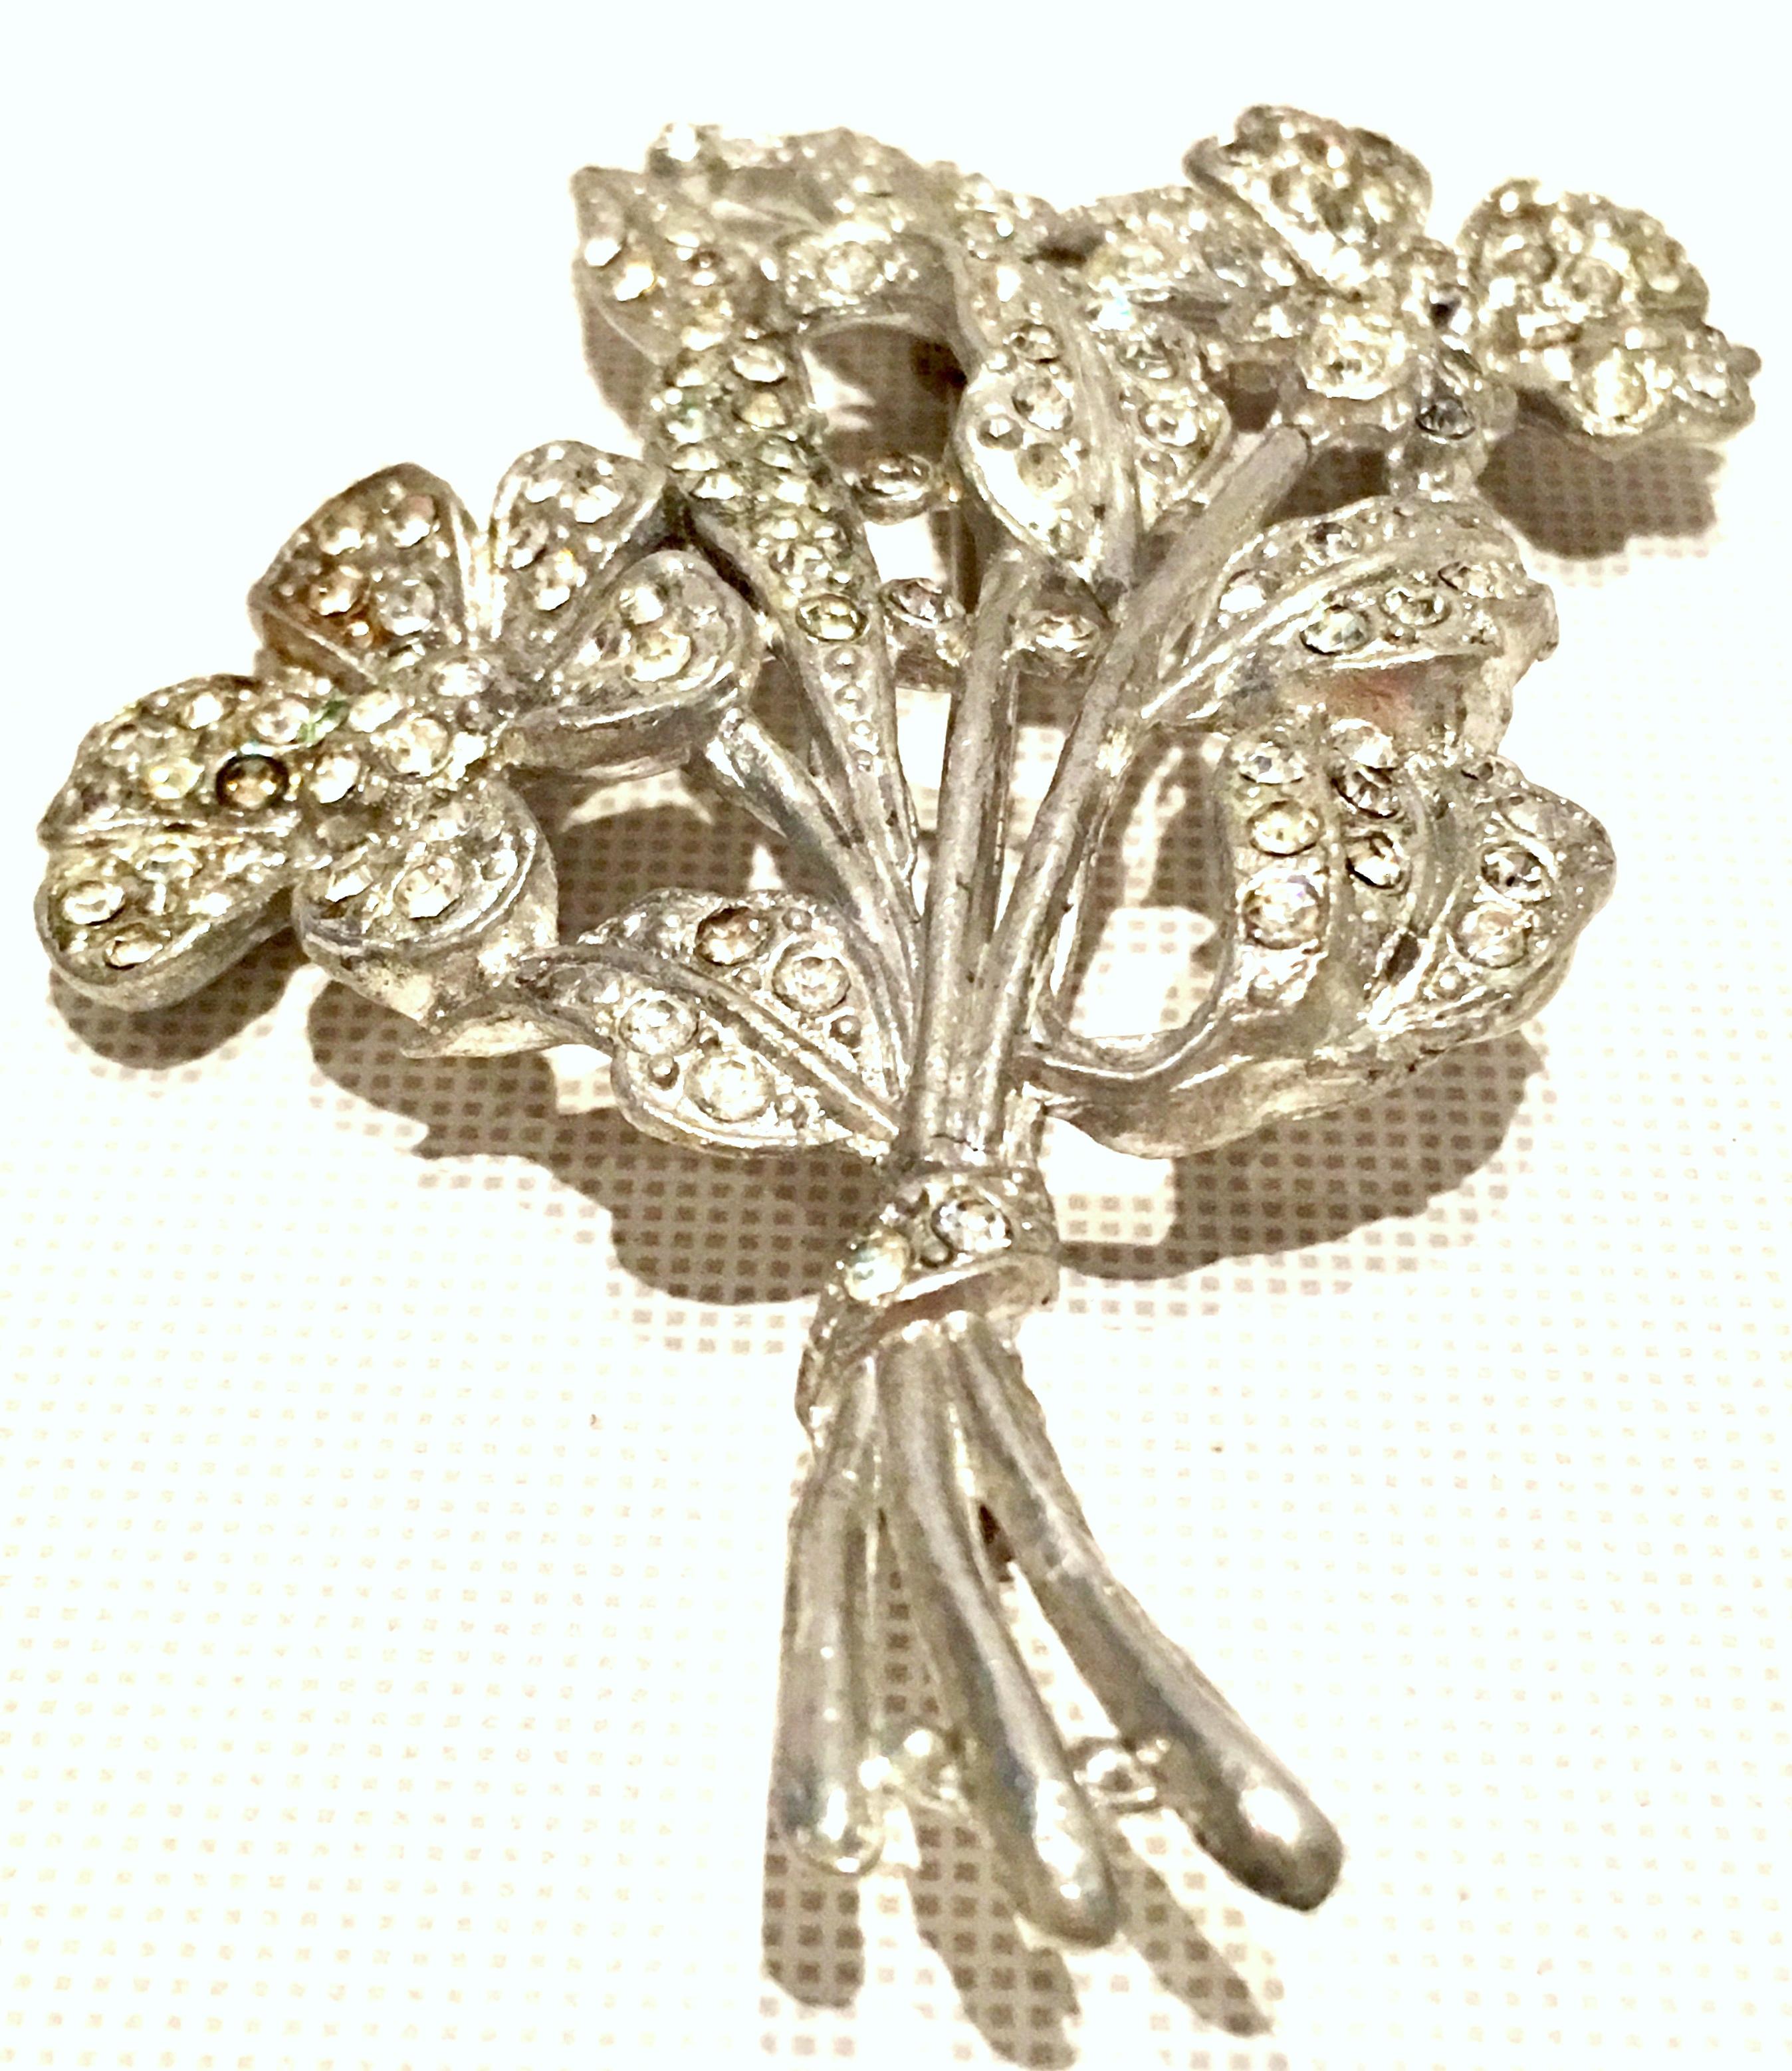 Antique 1920'S Monumental Silver Pot Metal & Crystal Clear Bezel Set Austrian Crystal Flower Brooch.
This dimensional work of art is dimensional and intricate in detail. The projection of this 3.5